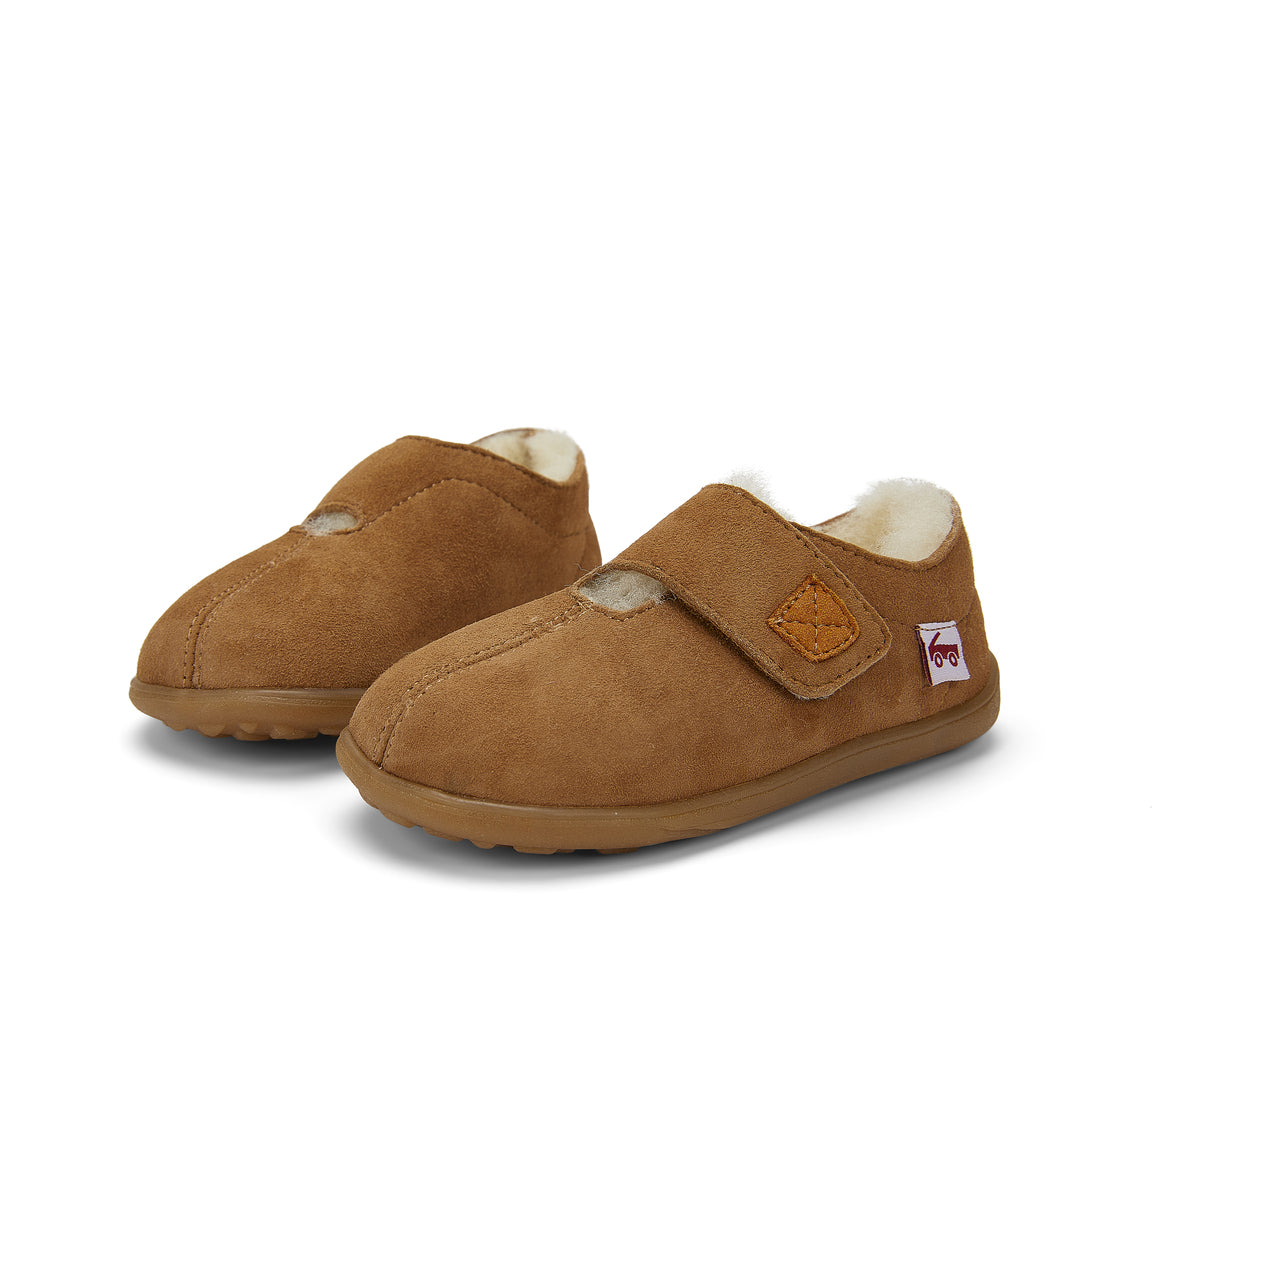 Colby Shearling Slipper Shoe - Brown